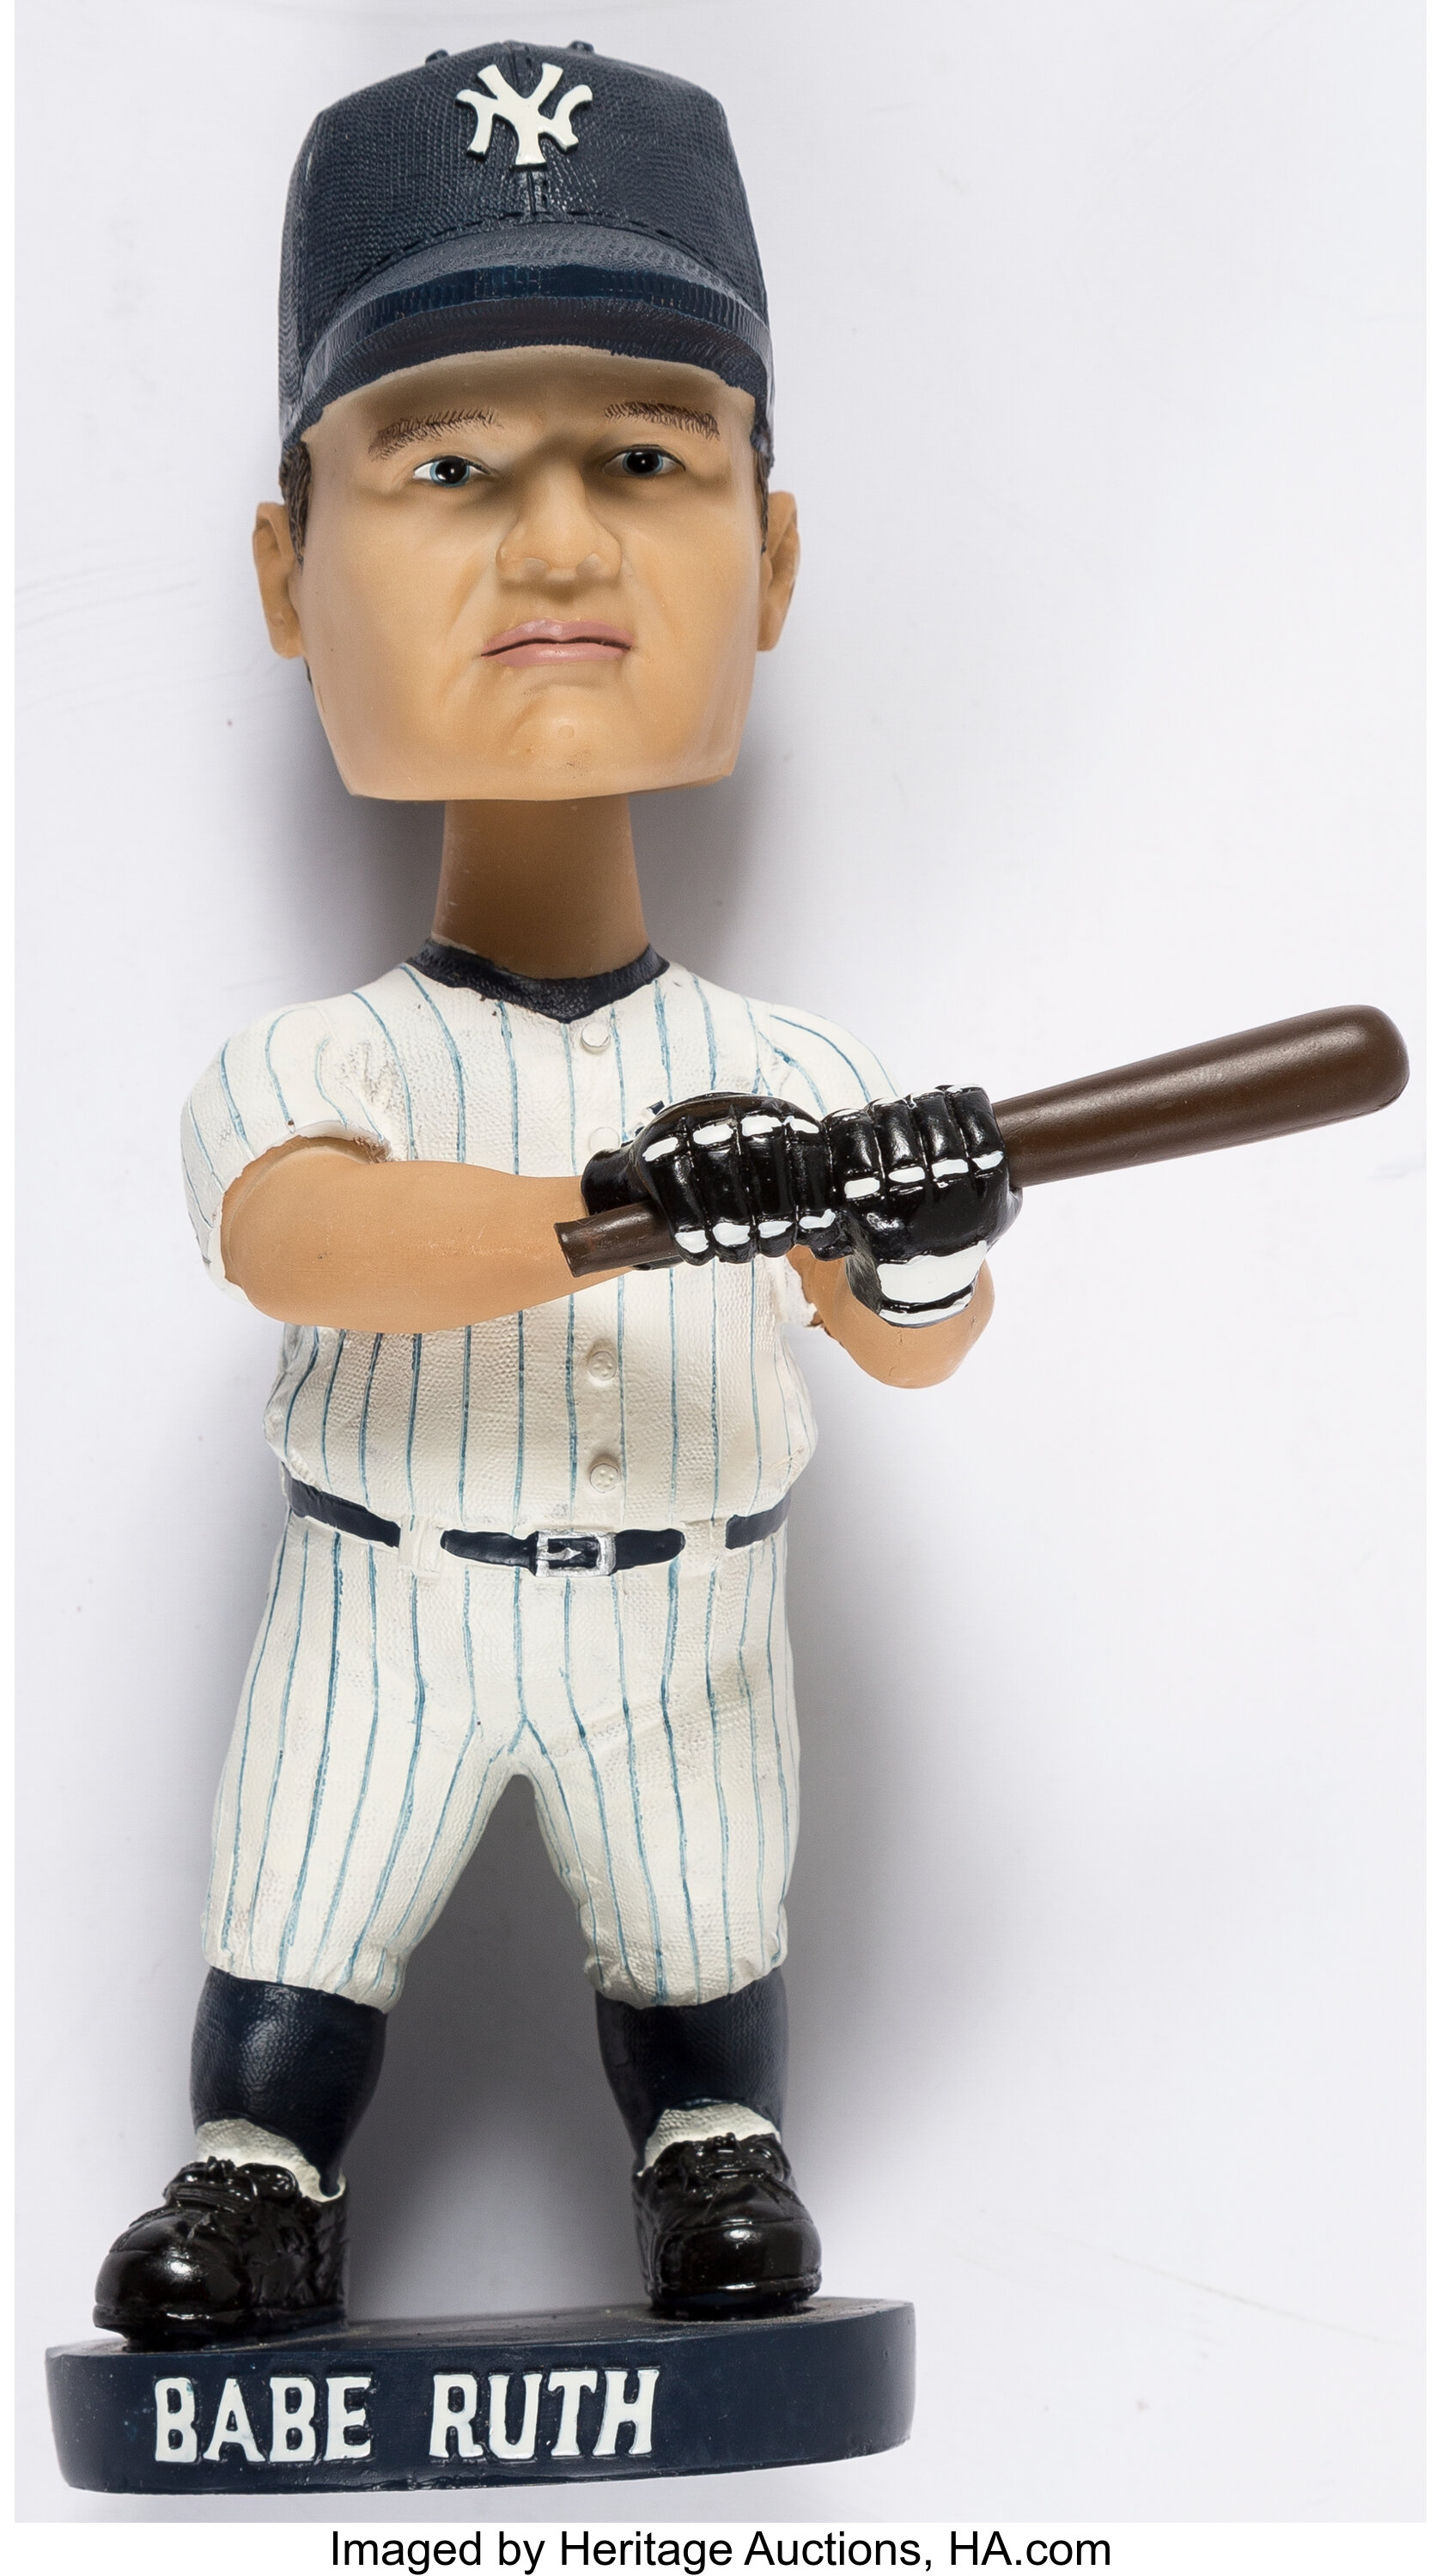 The Dodgers are giving out a Babe Ruth bobblehead even though he never  played for them